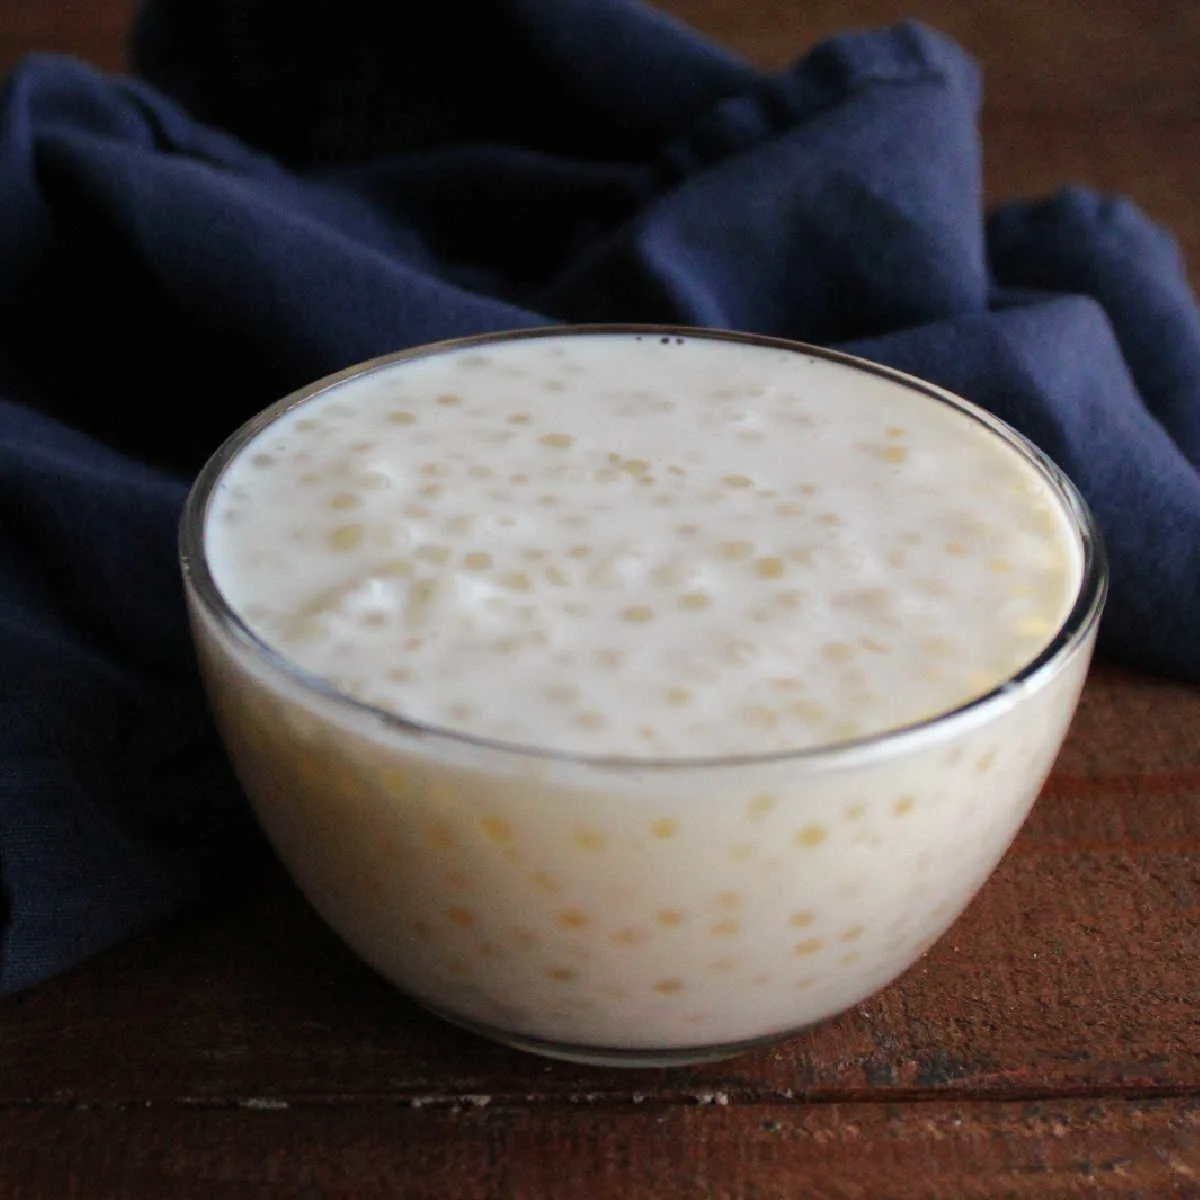 Close up of a small bowl of tapioca pudding, showing the creamy pudding with the soft pearls of tapioca.